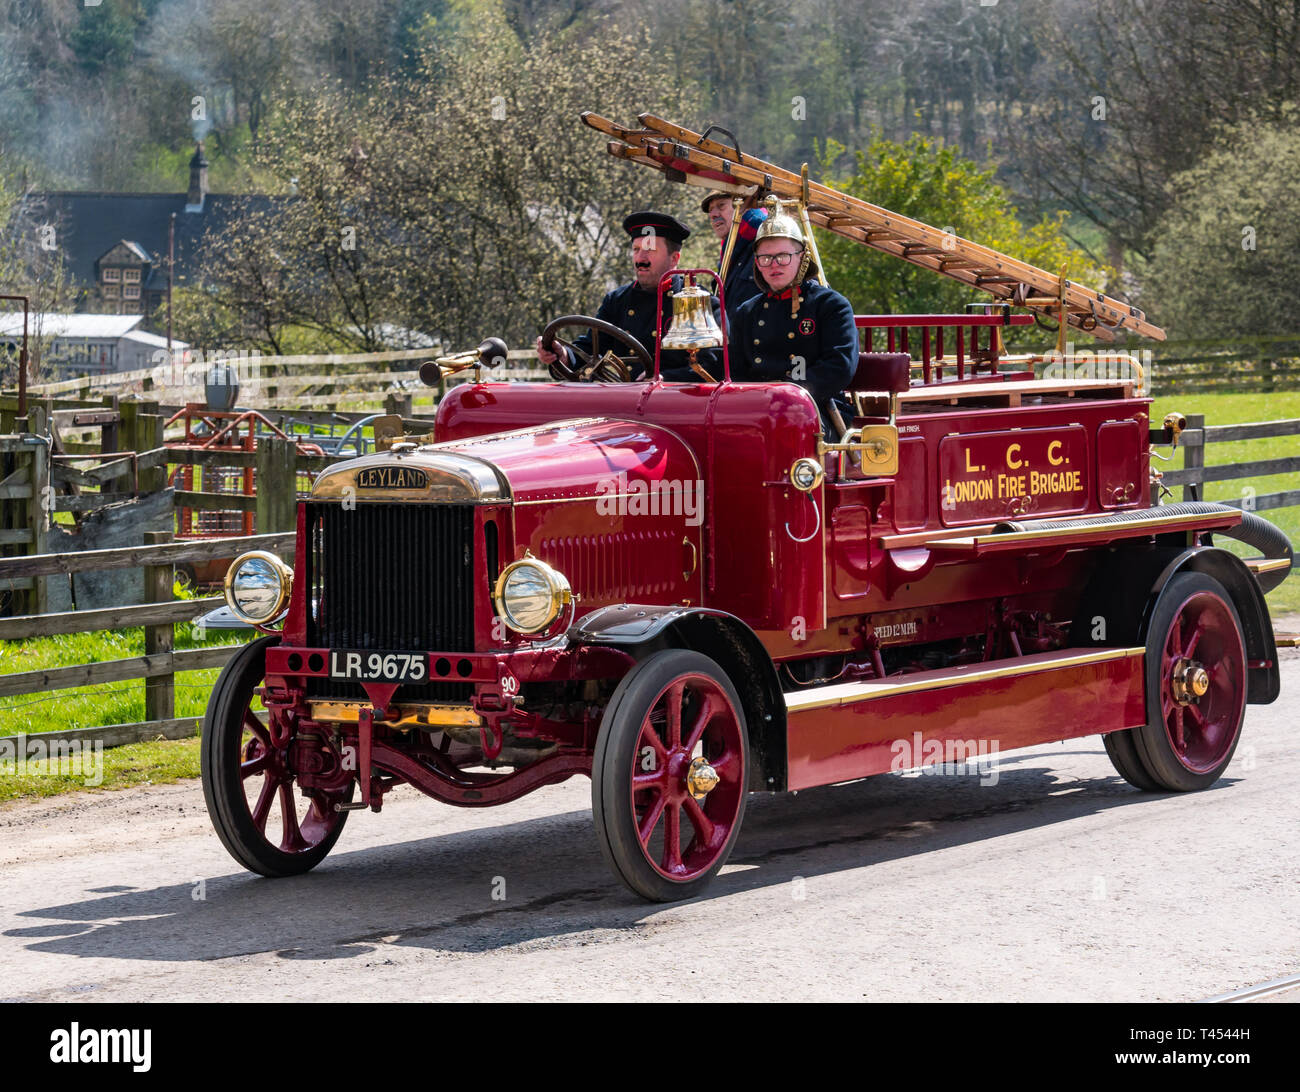 Beamish, Durham County, England, United Kingdom, 13 April 2019. Beamish Steam Day: A vintage 1918 Leyland Feu4 open top fire engine vehicle with men dressed in vintage firemen costumes on display at Beamish Living Museum Stock Photo